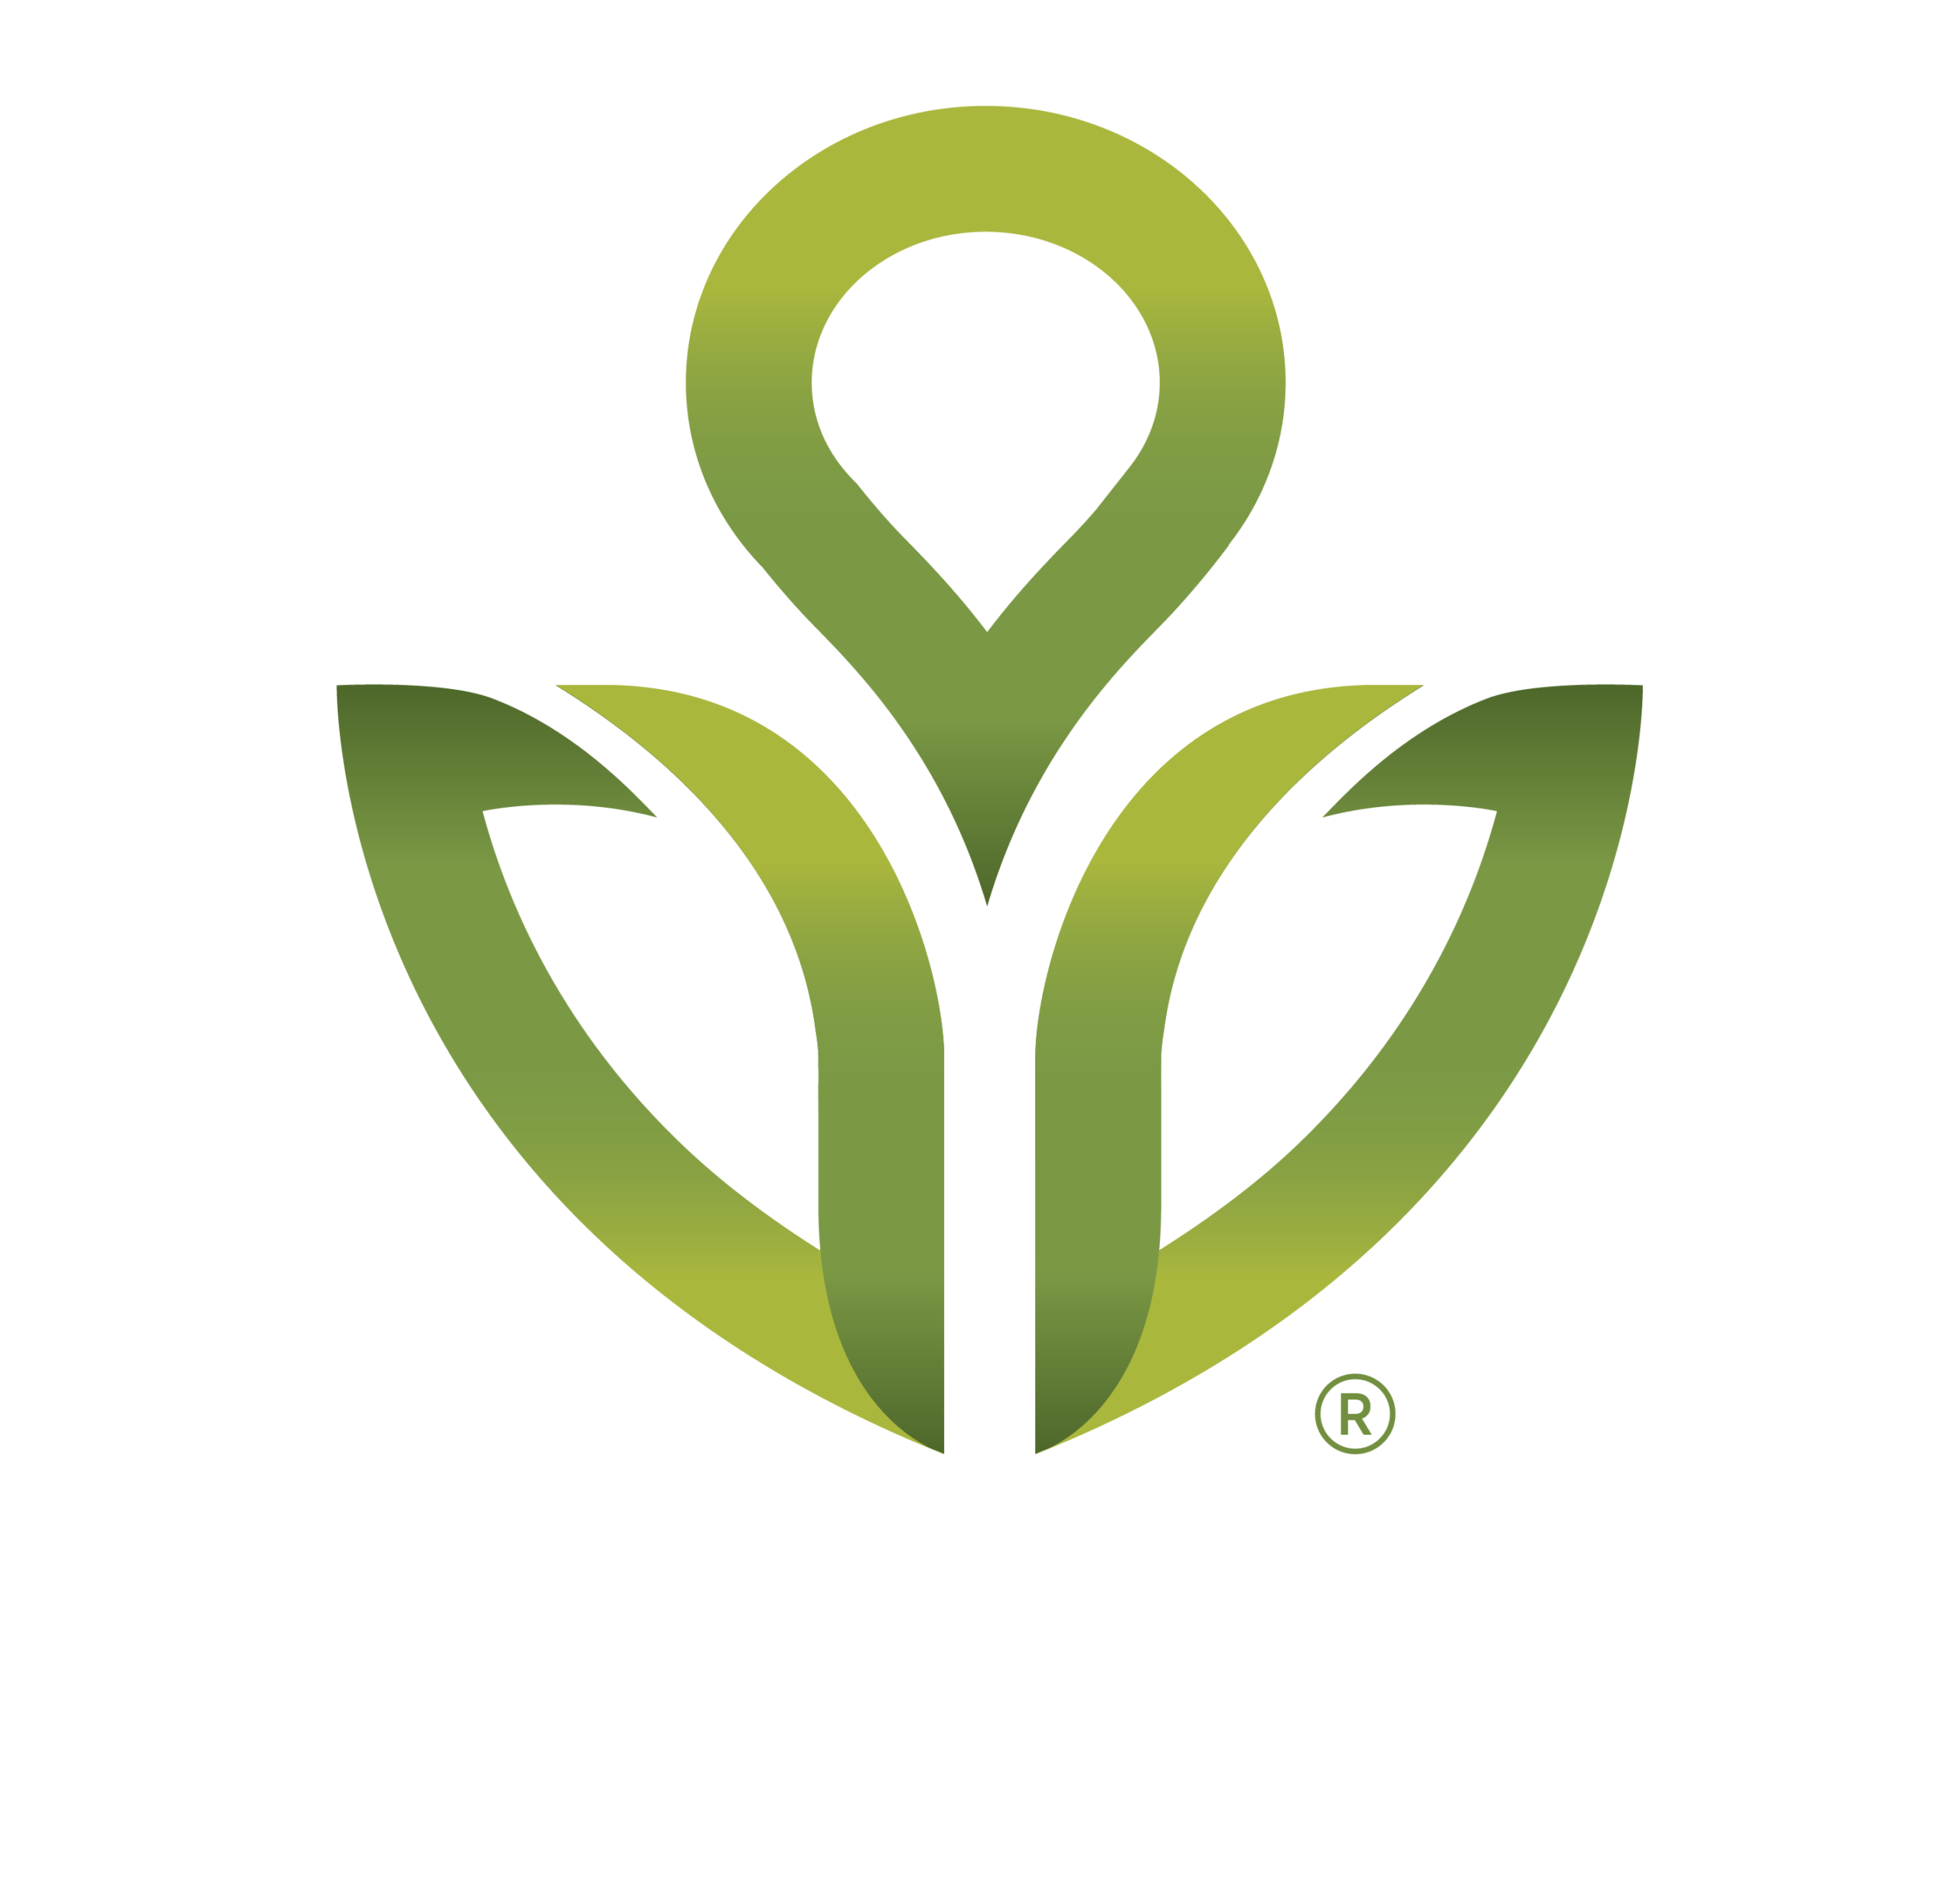 IN THE EVENT LOGO